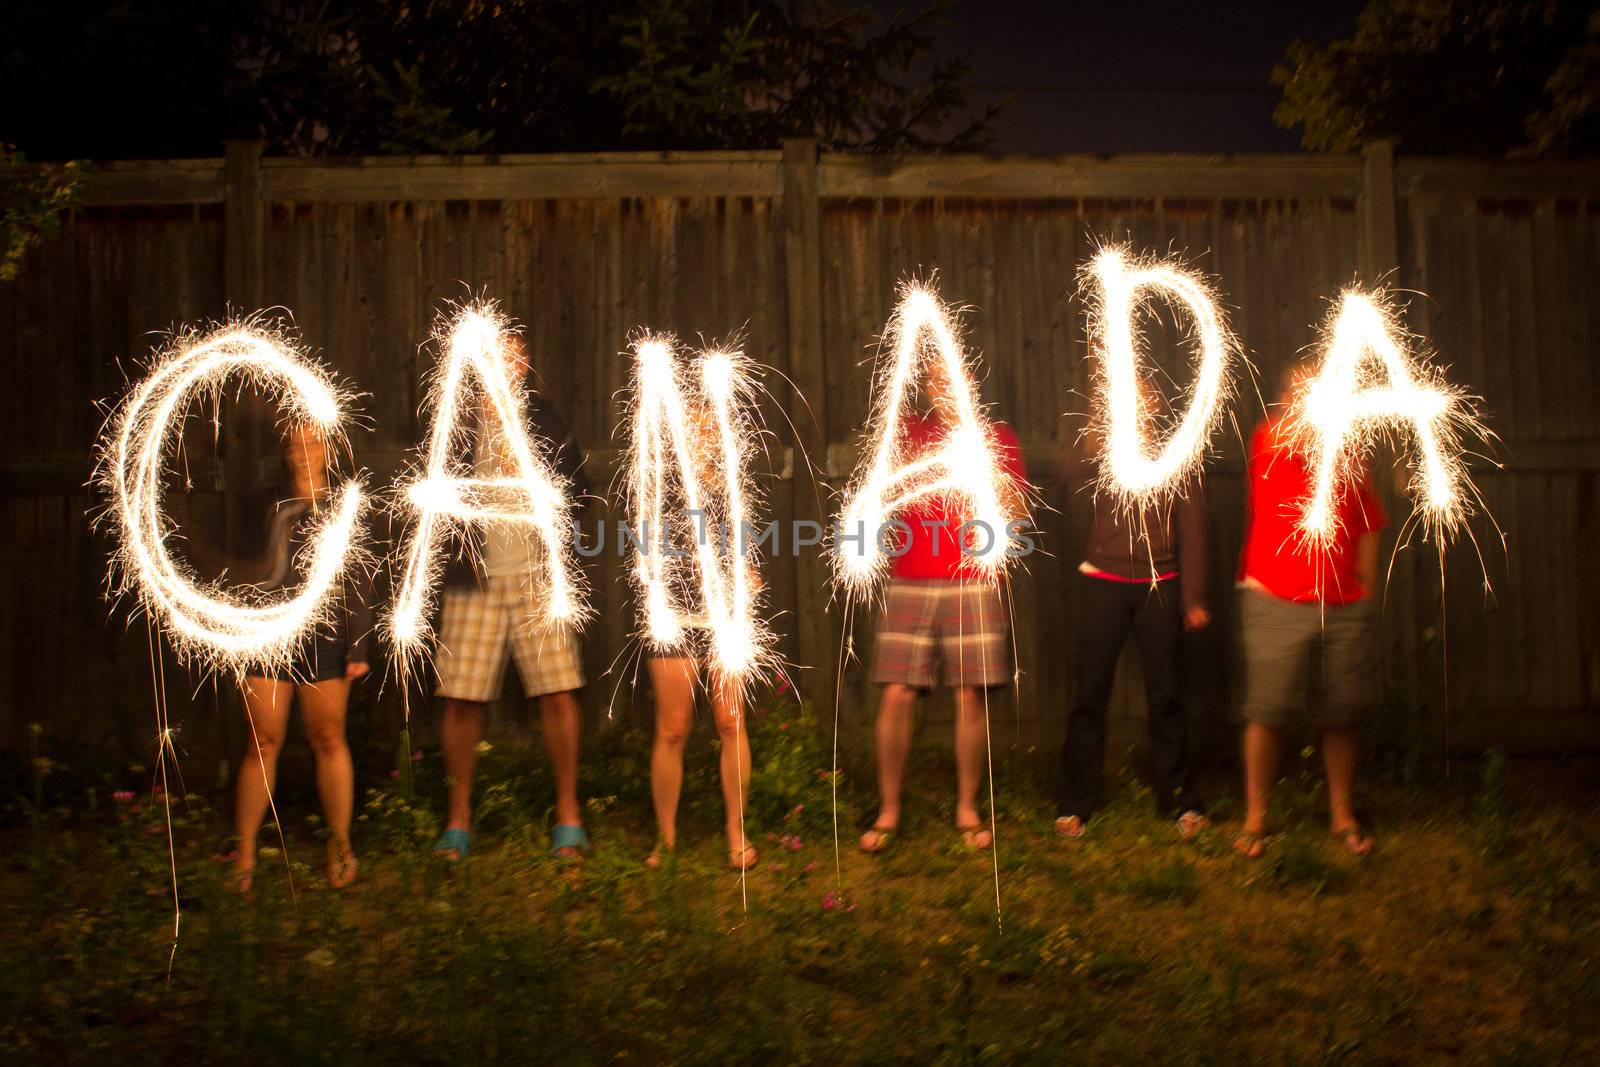 Canada sparklers in time lapse photography by bigjohn36